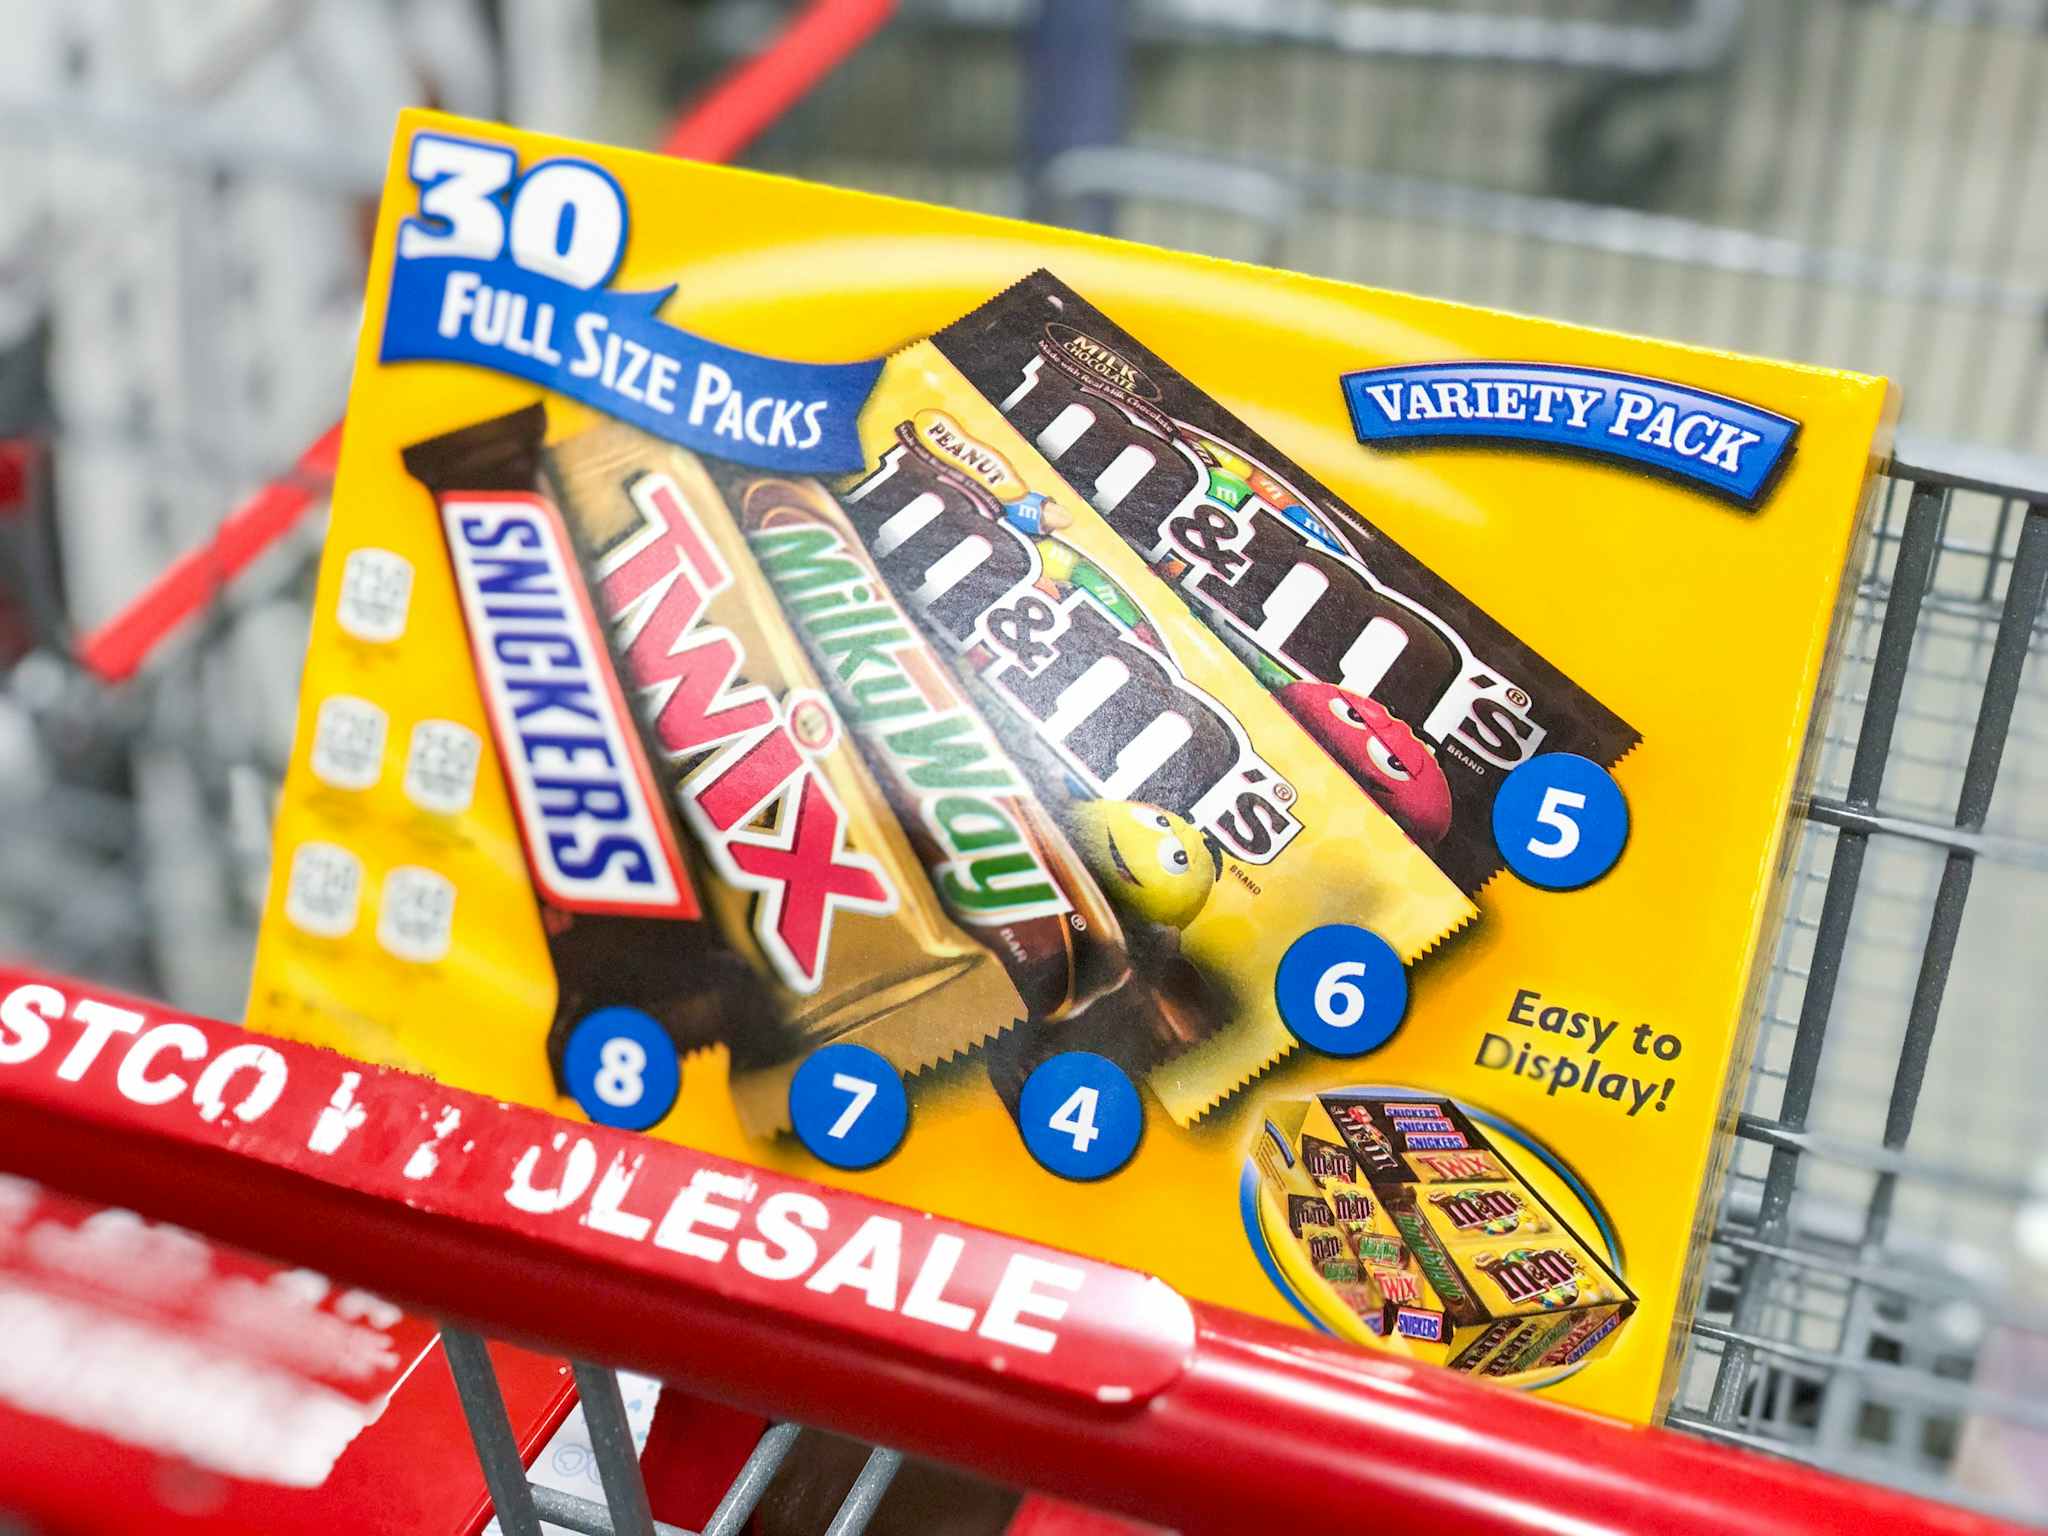 Costco: Sweet Deal on Hershey's and Mars Full Size Variety Packs